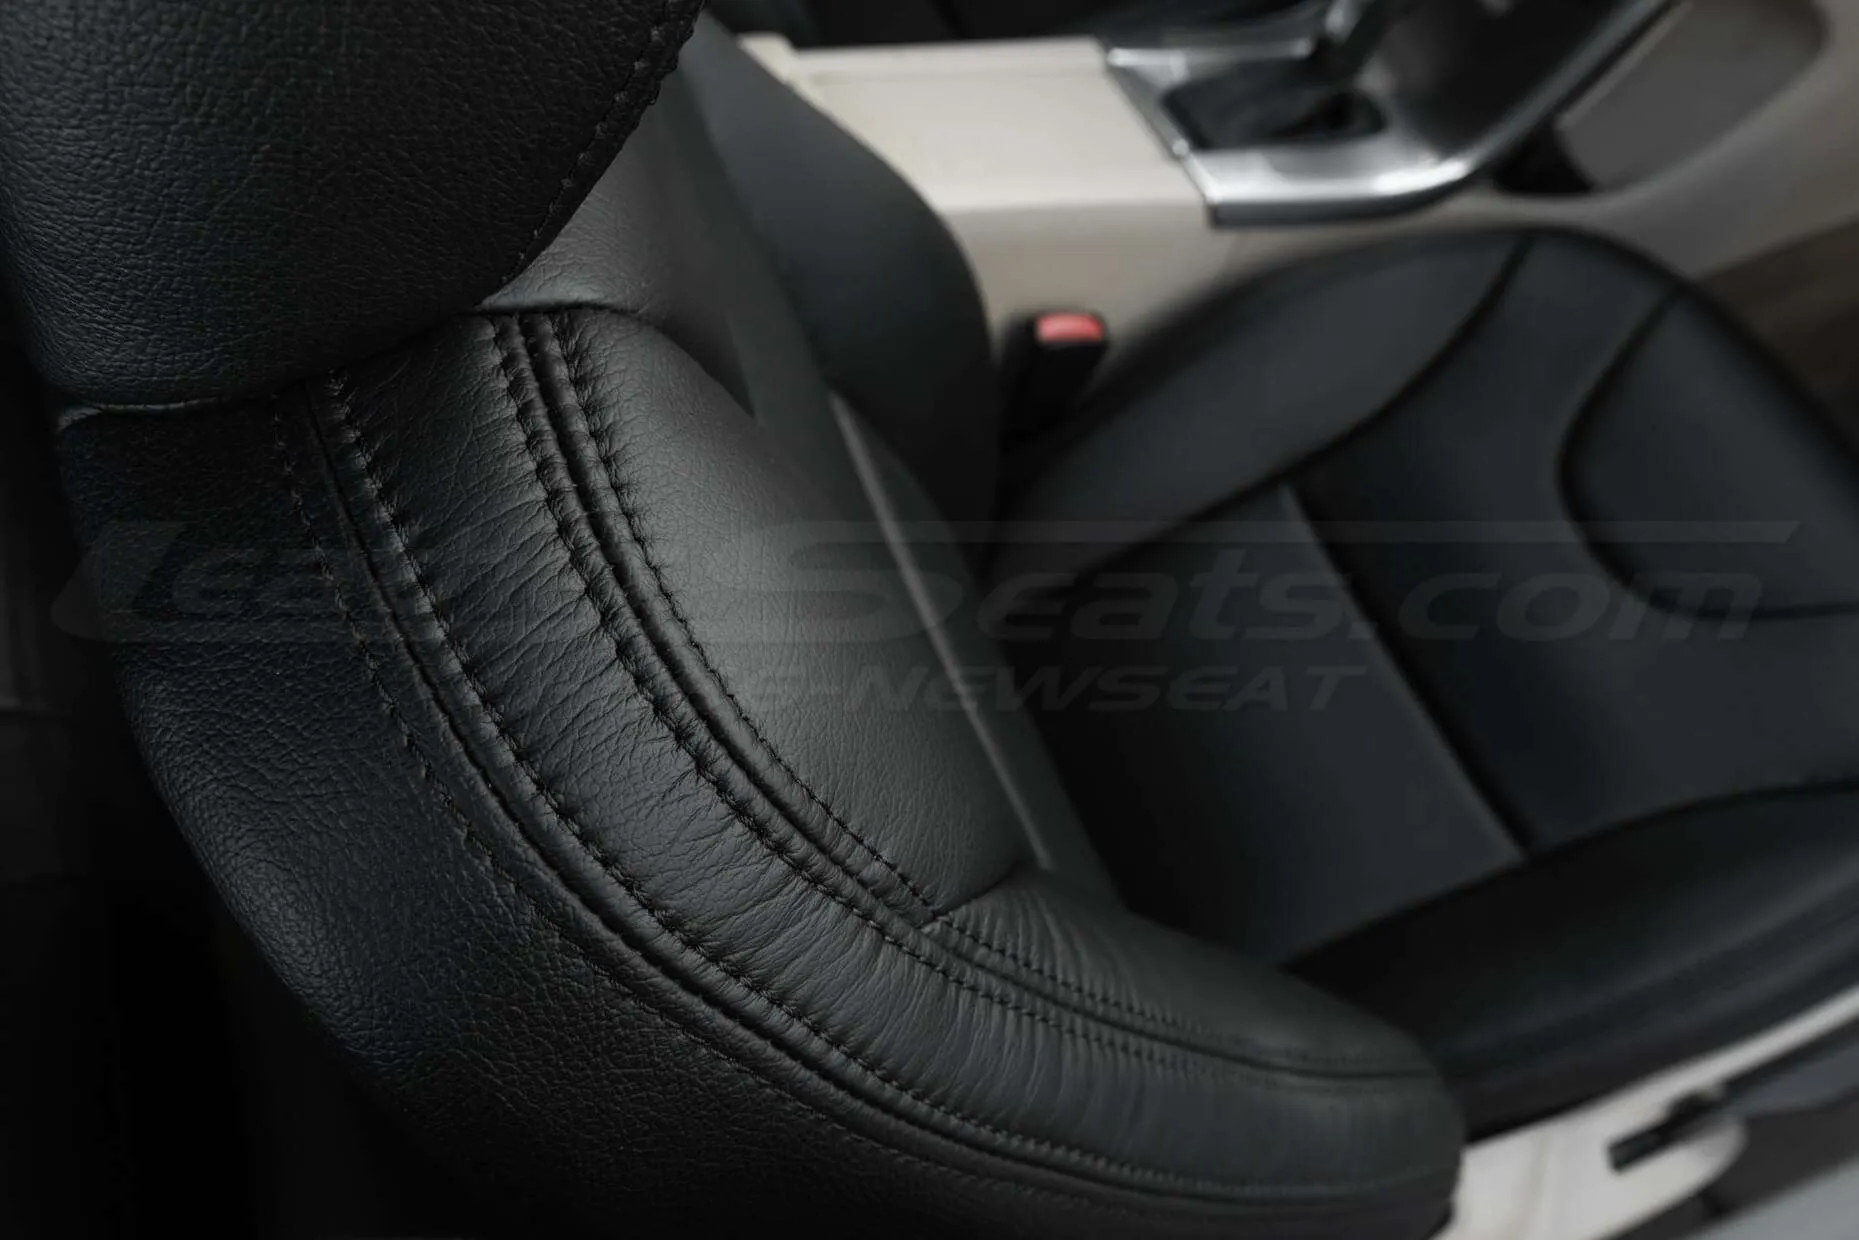 Top down view of front passenger seat with focus on stitching